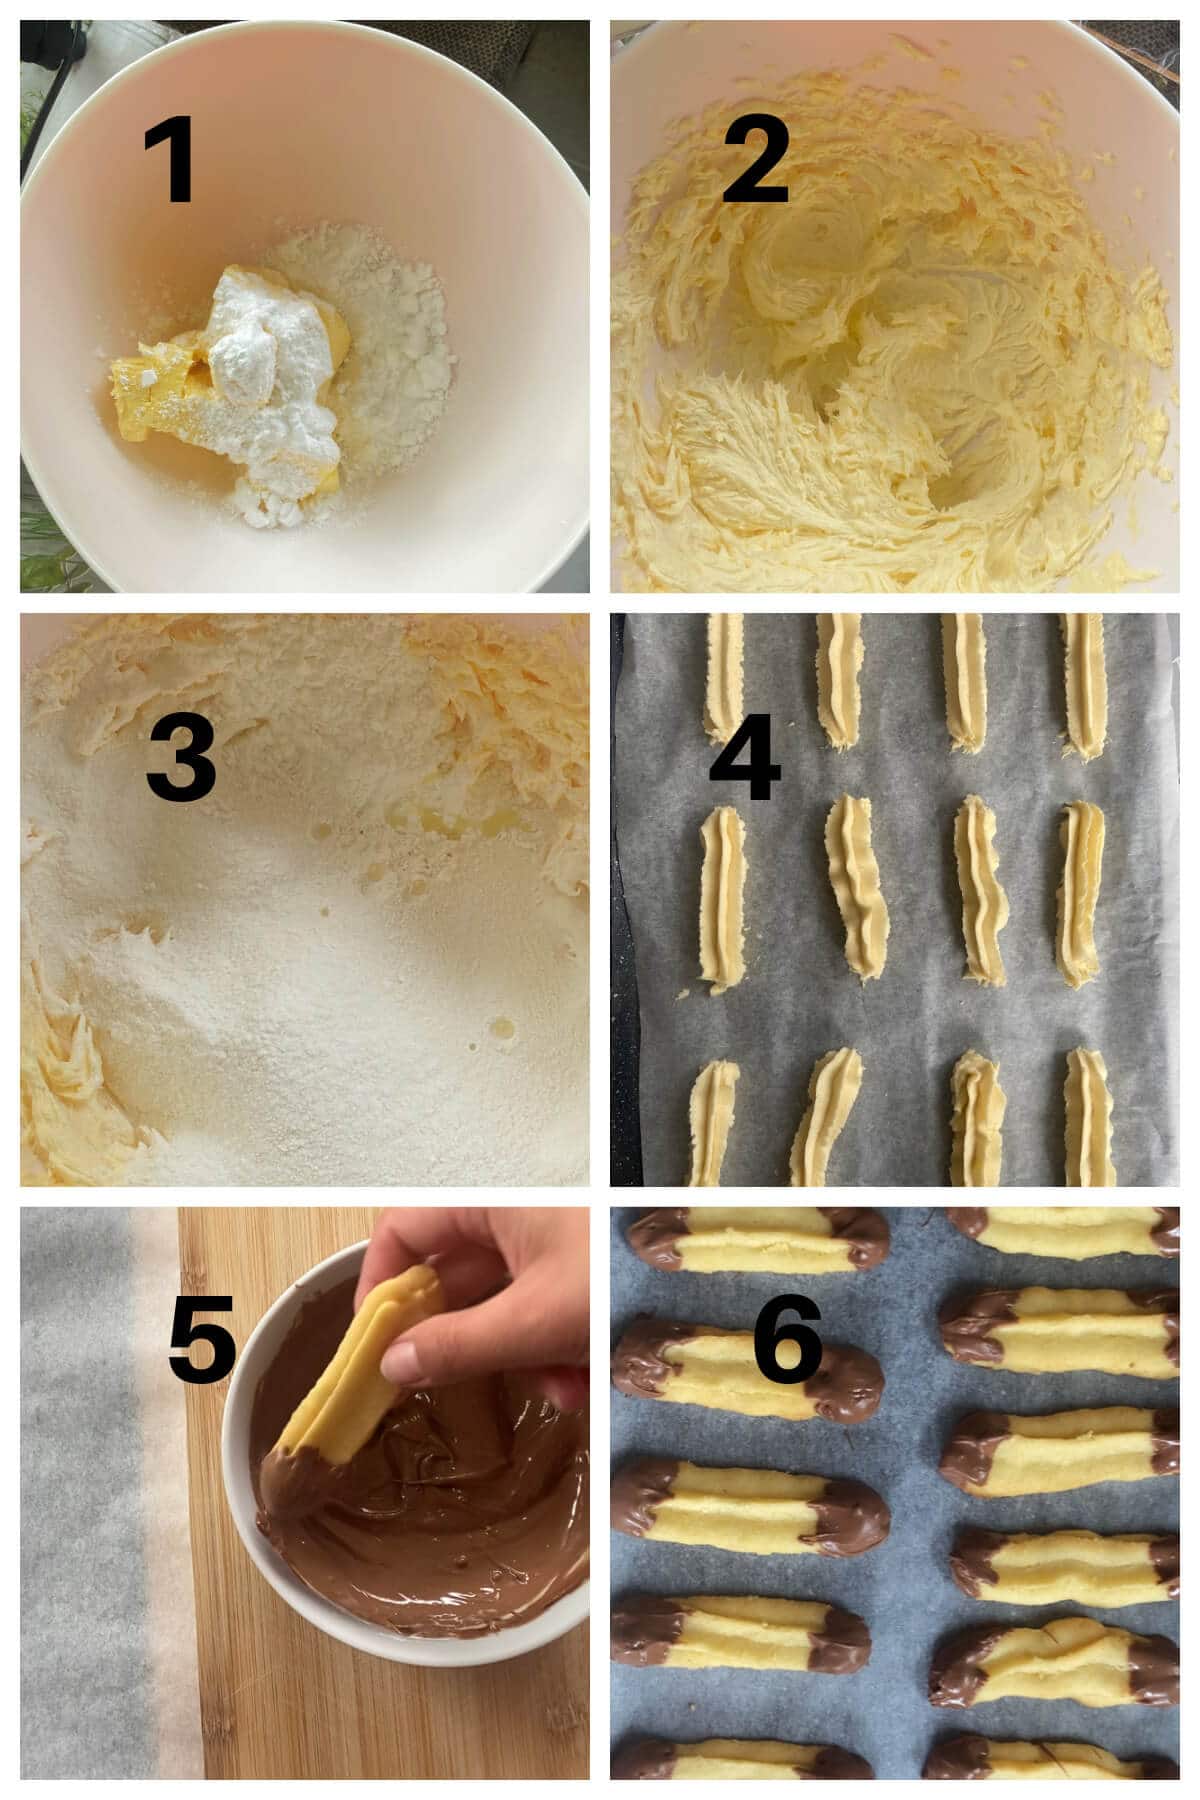 Collage of 6 photos to show how to make Viennese shortbread biscuits.